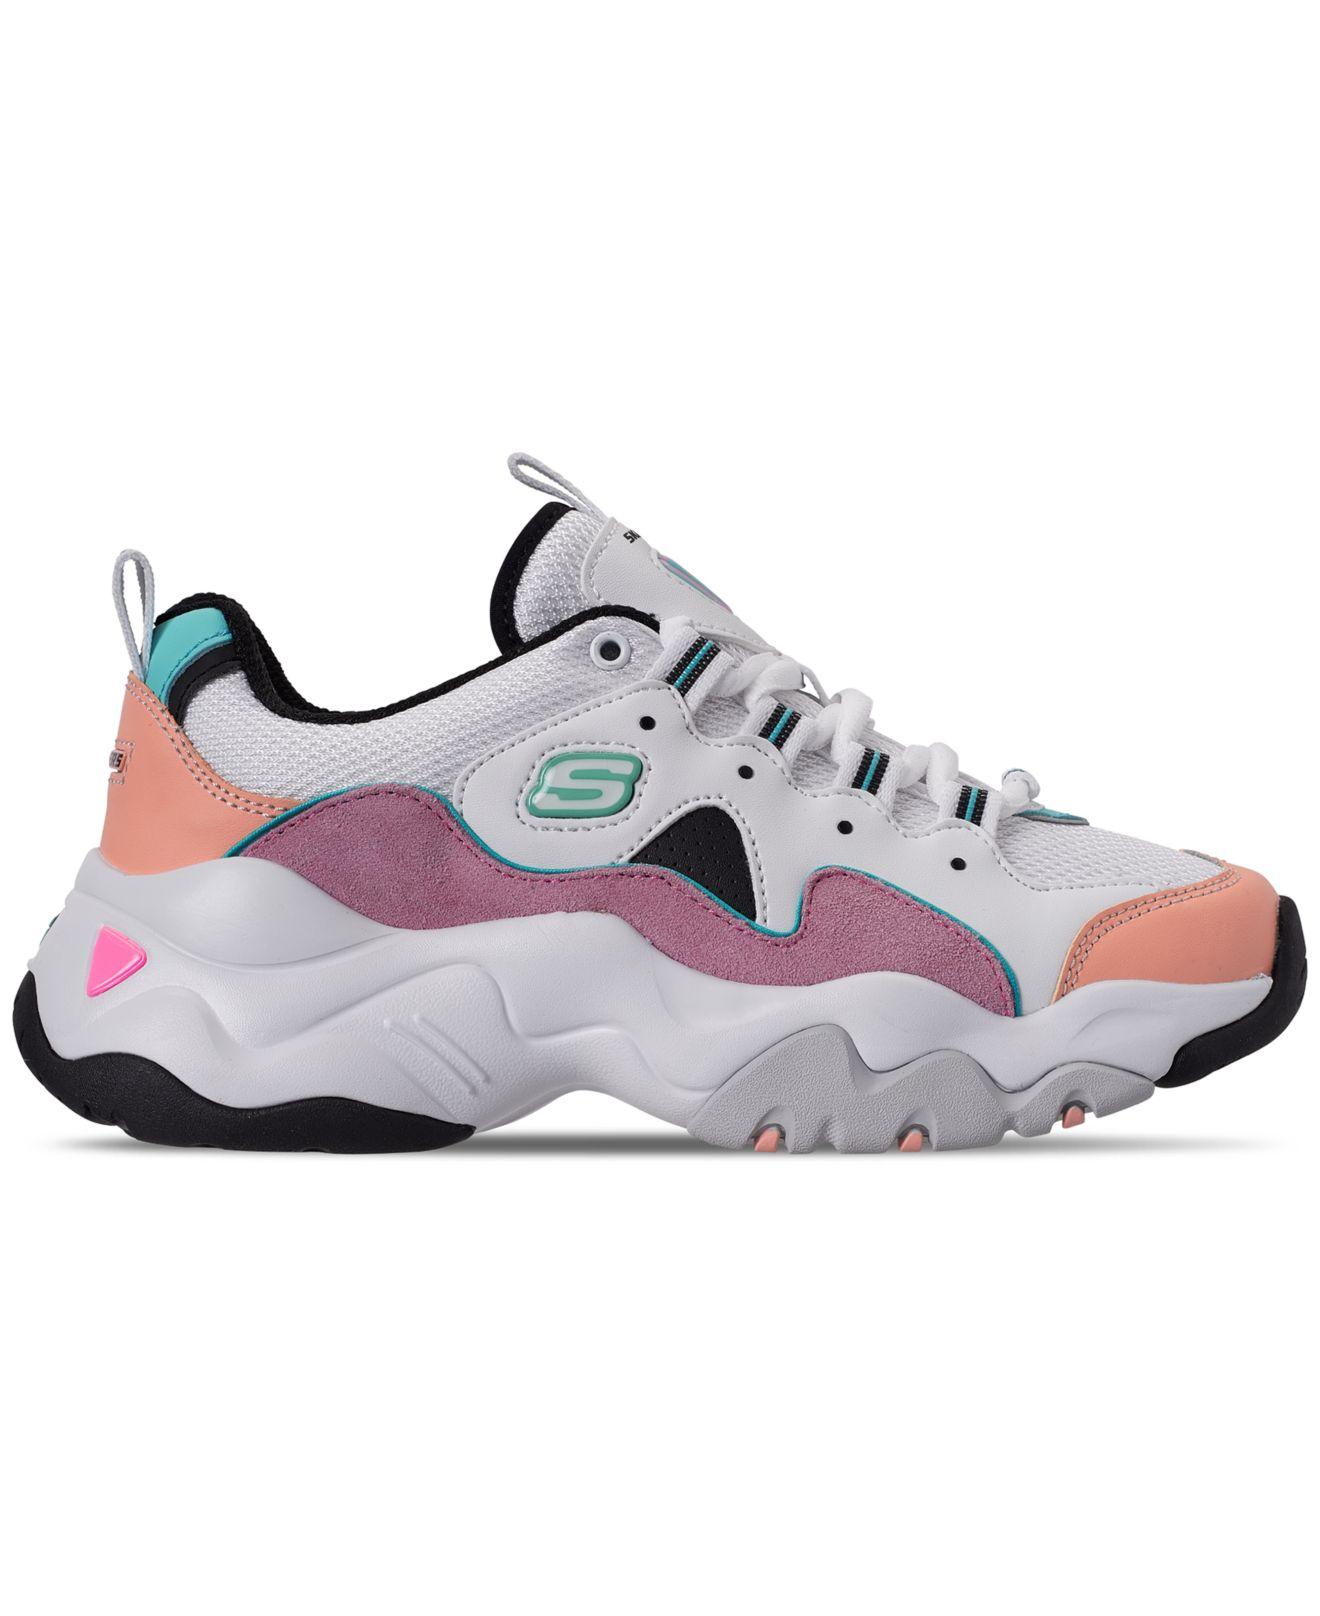 Skechers Rubber D'lite Chunky Trainers 3.0 In Pastel - Lyst